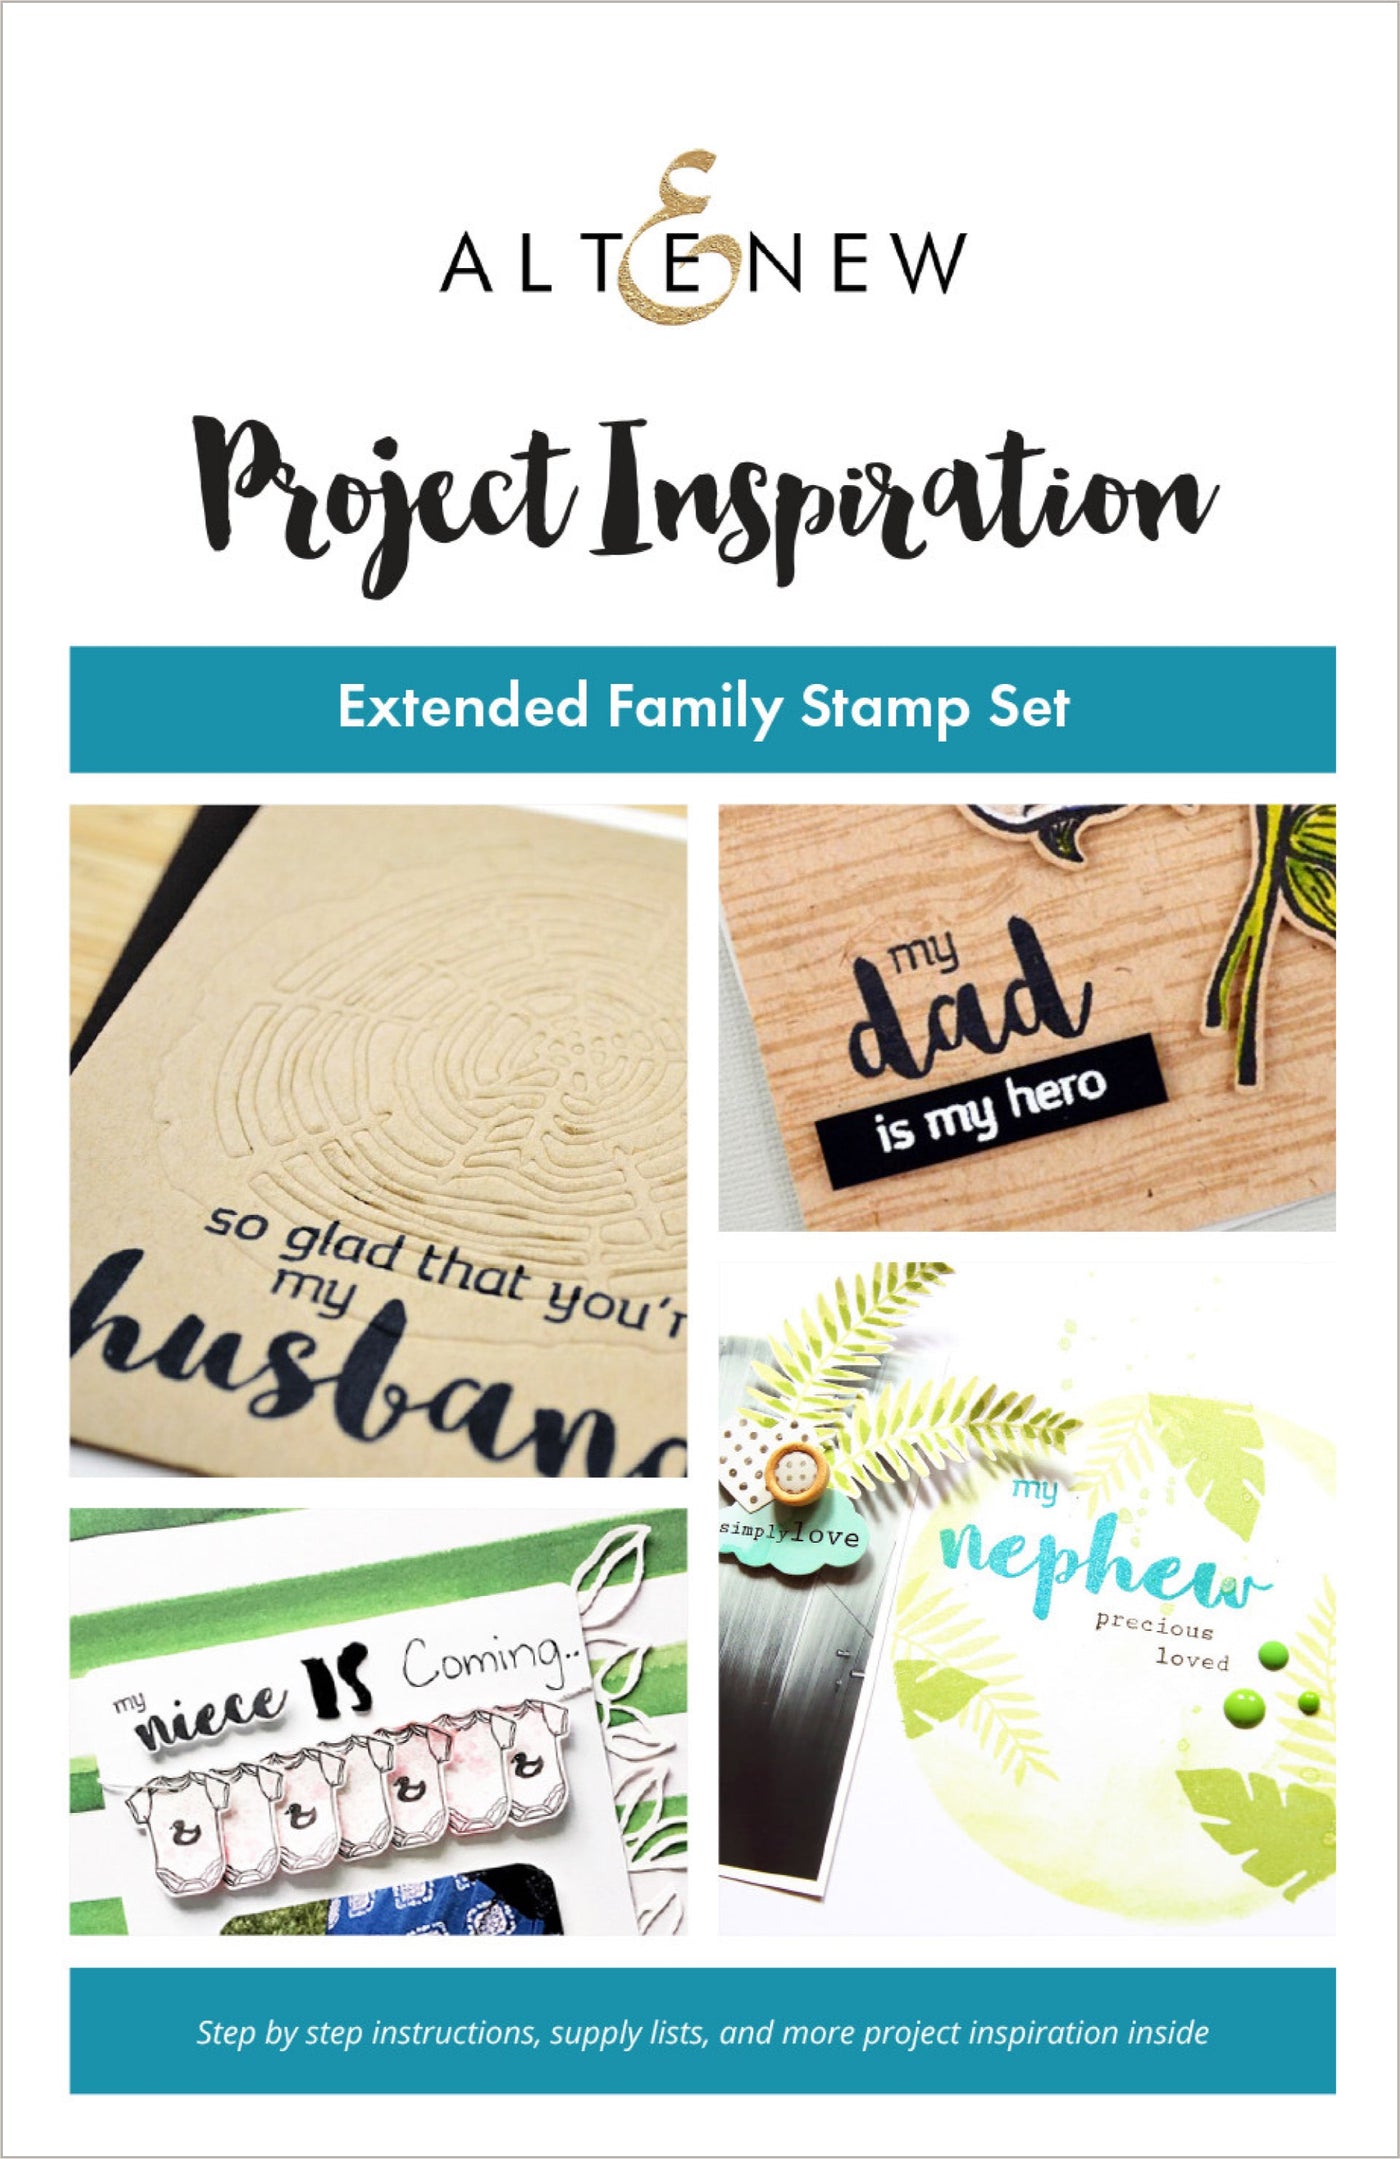 Printed Media Extended Family Inspiration Guide